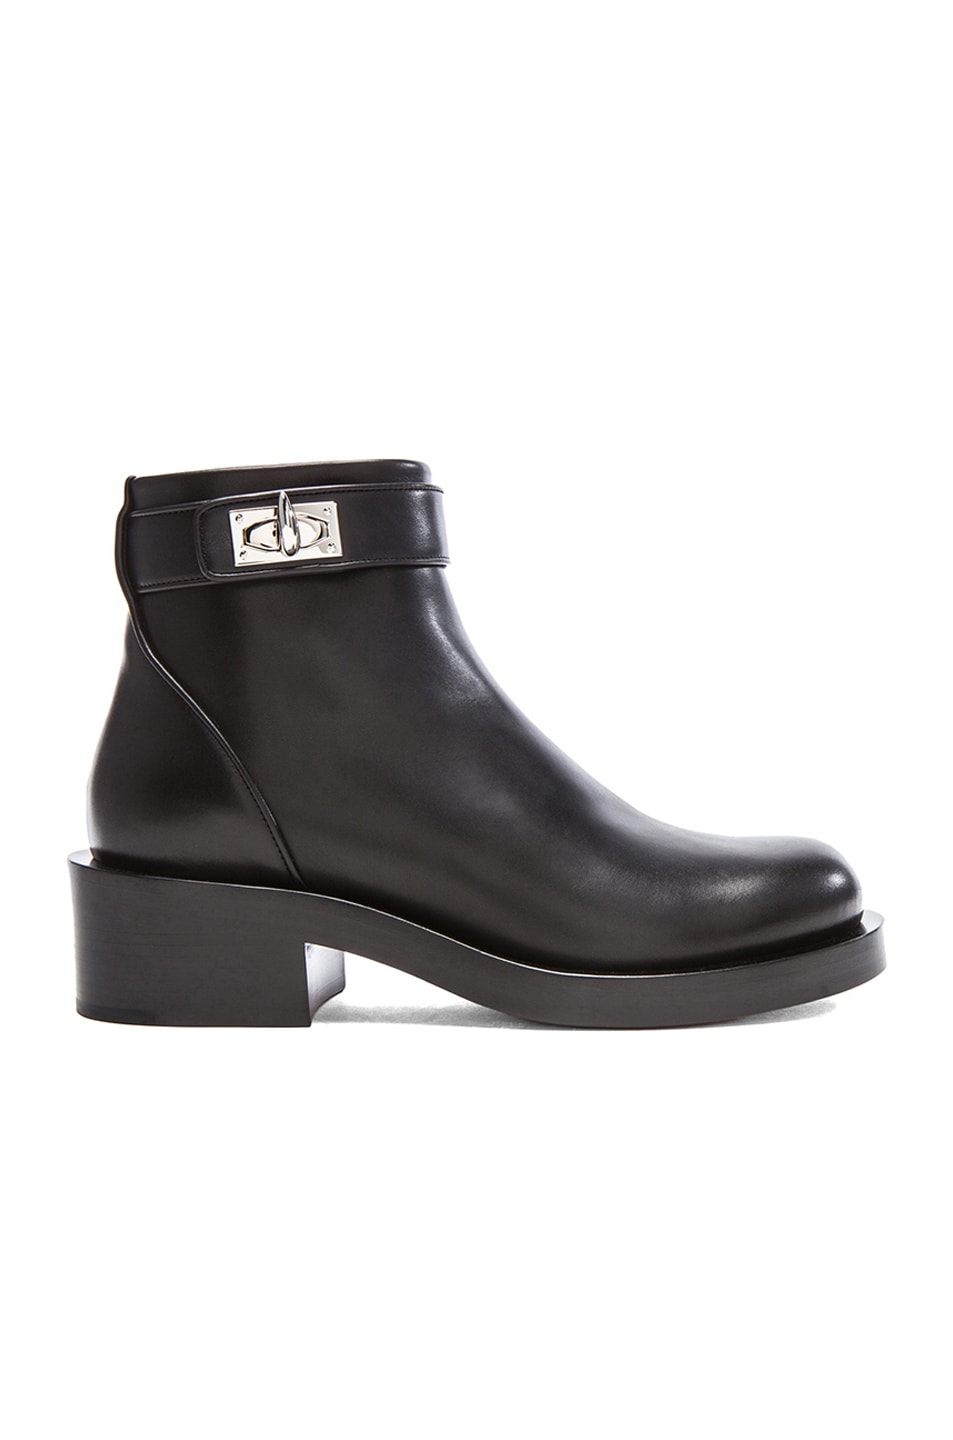 Givenchy Silvia Shark Lock Leather Ankle Boots in Black | FWRD